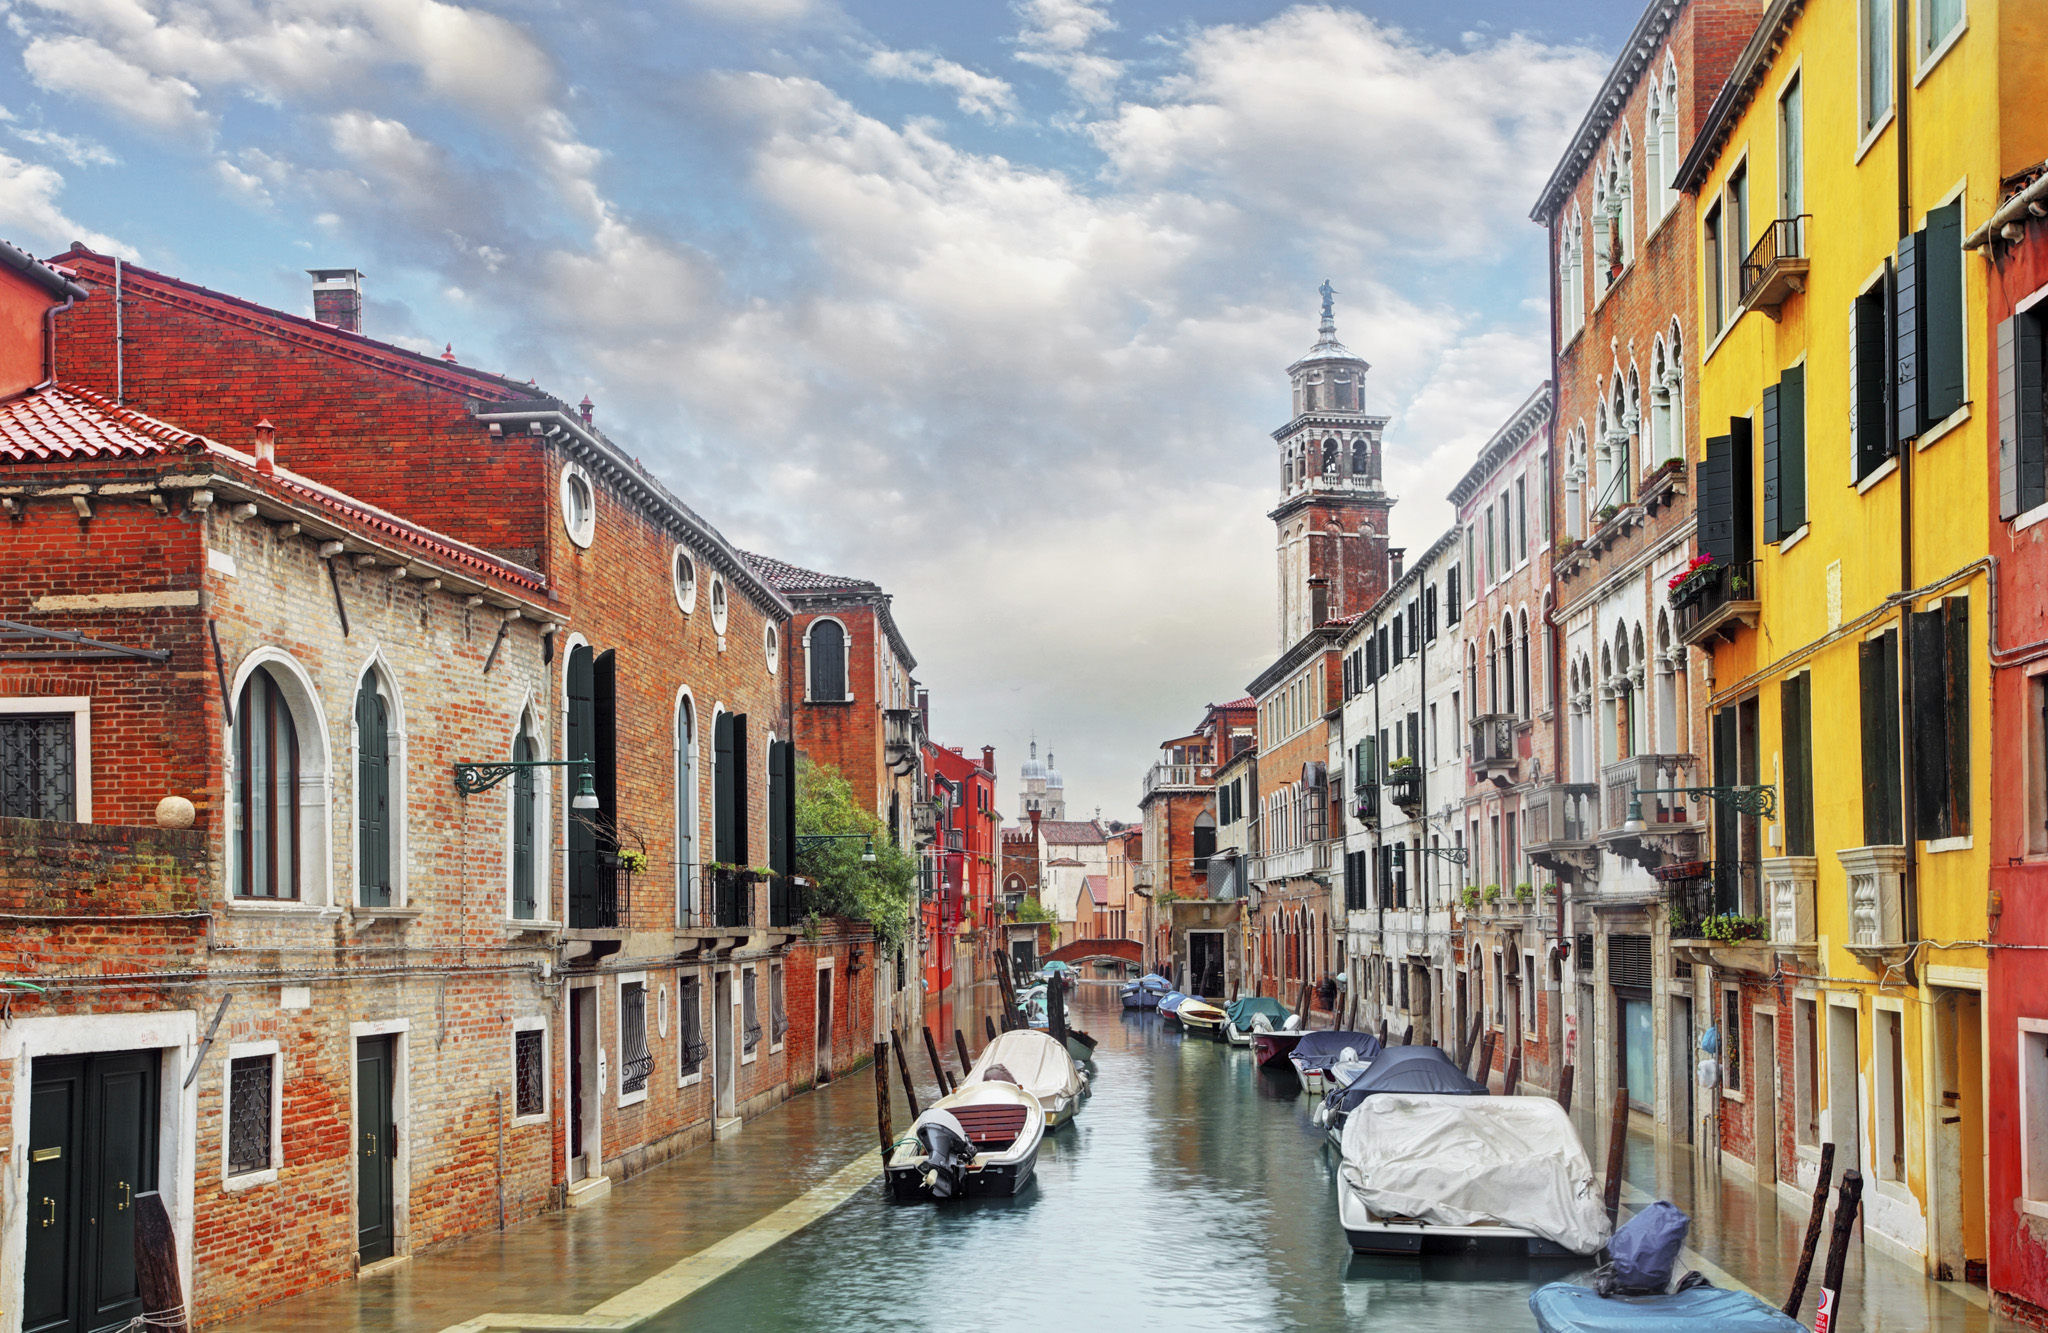 t A picturesque canal in Venice lined with boats Magnificent piazzas - photo 5